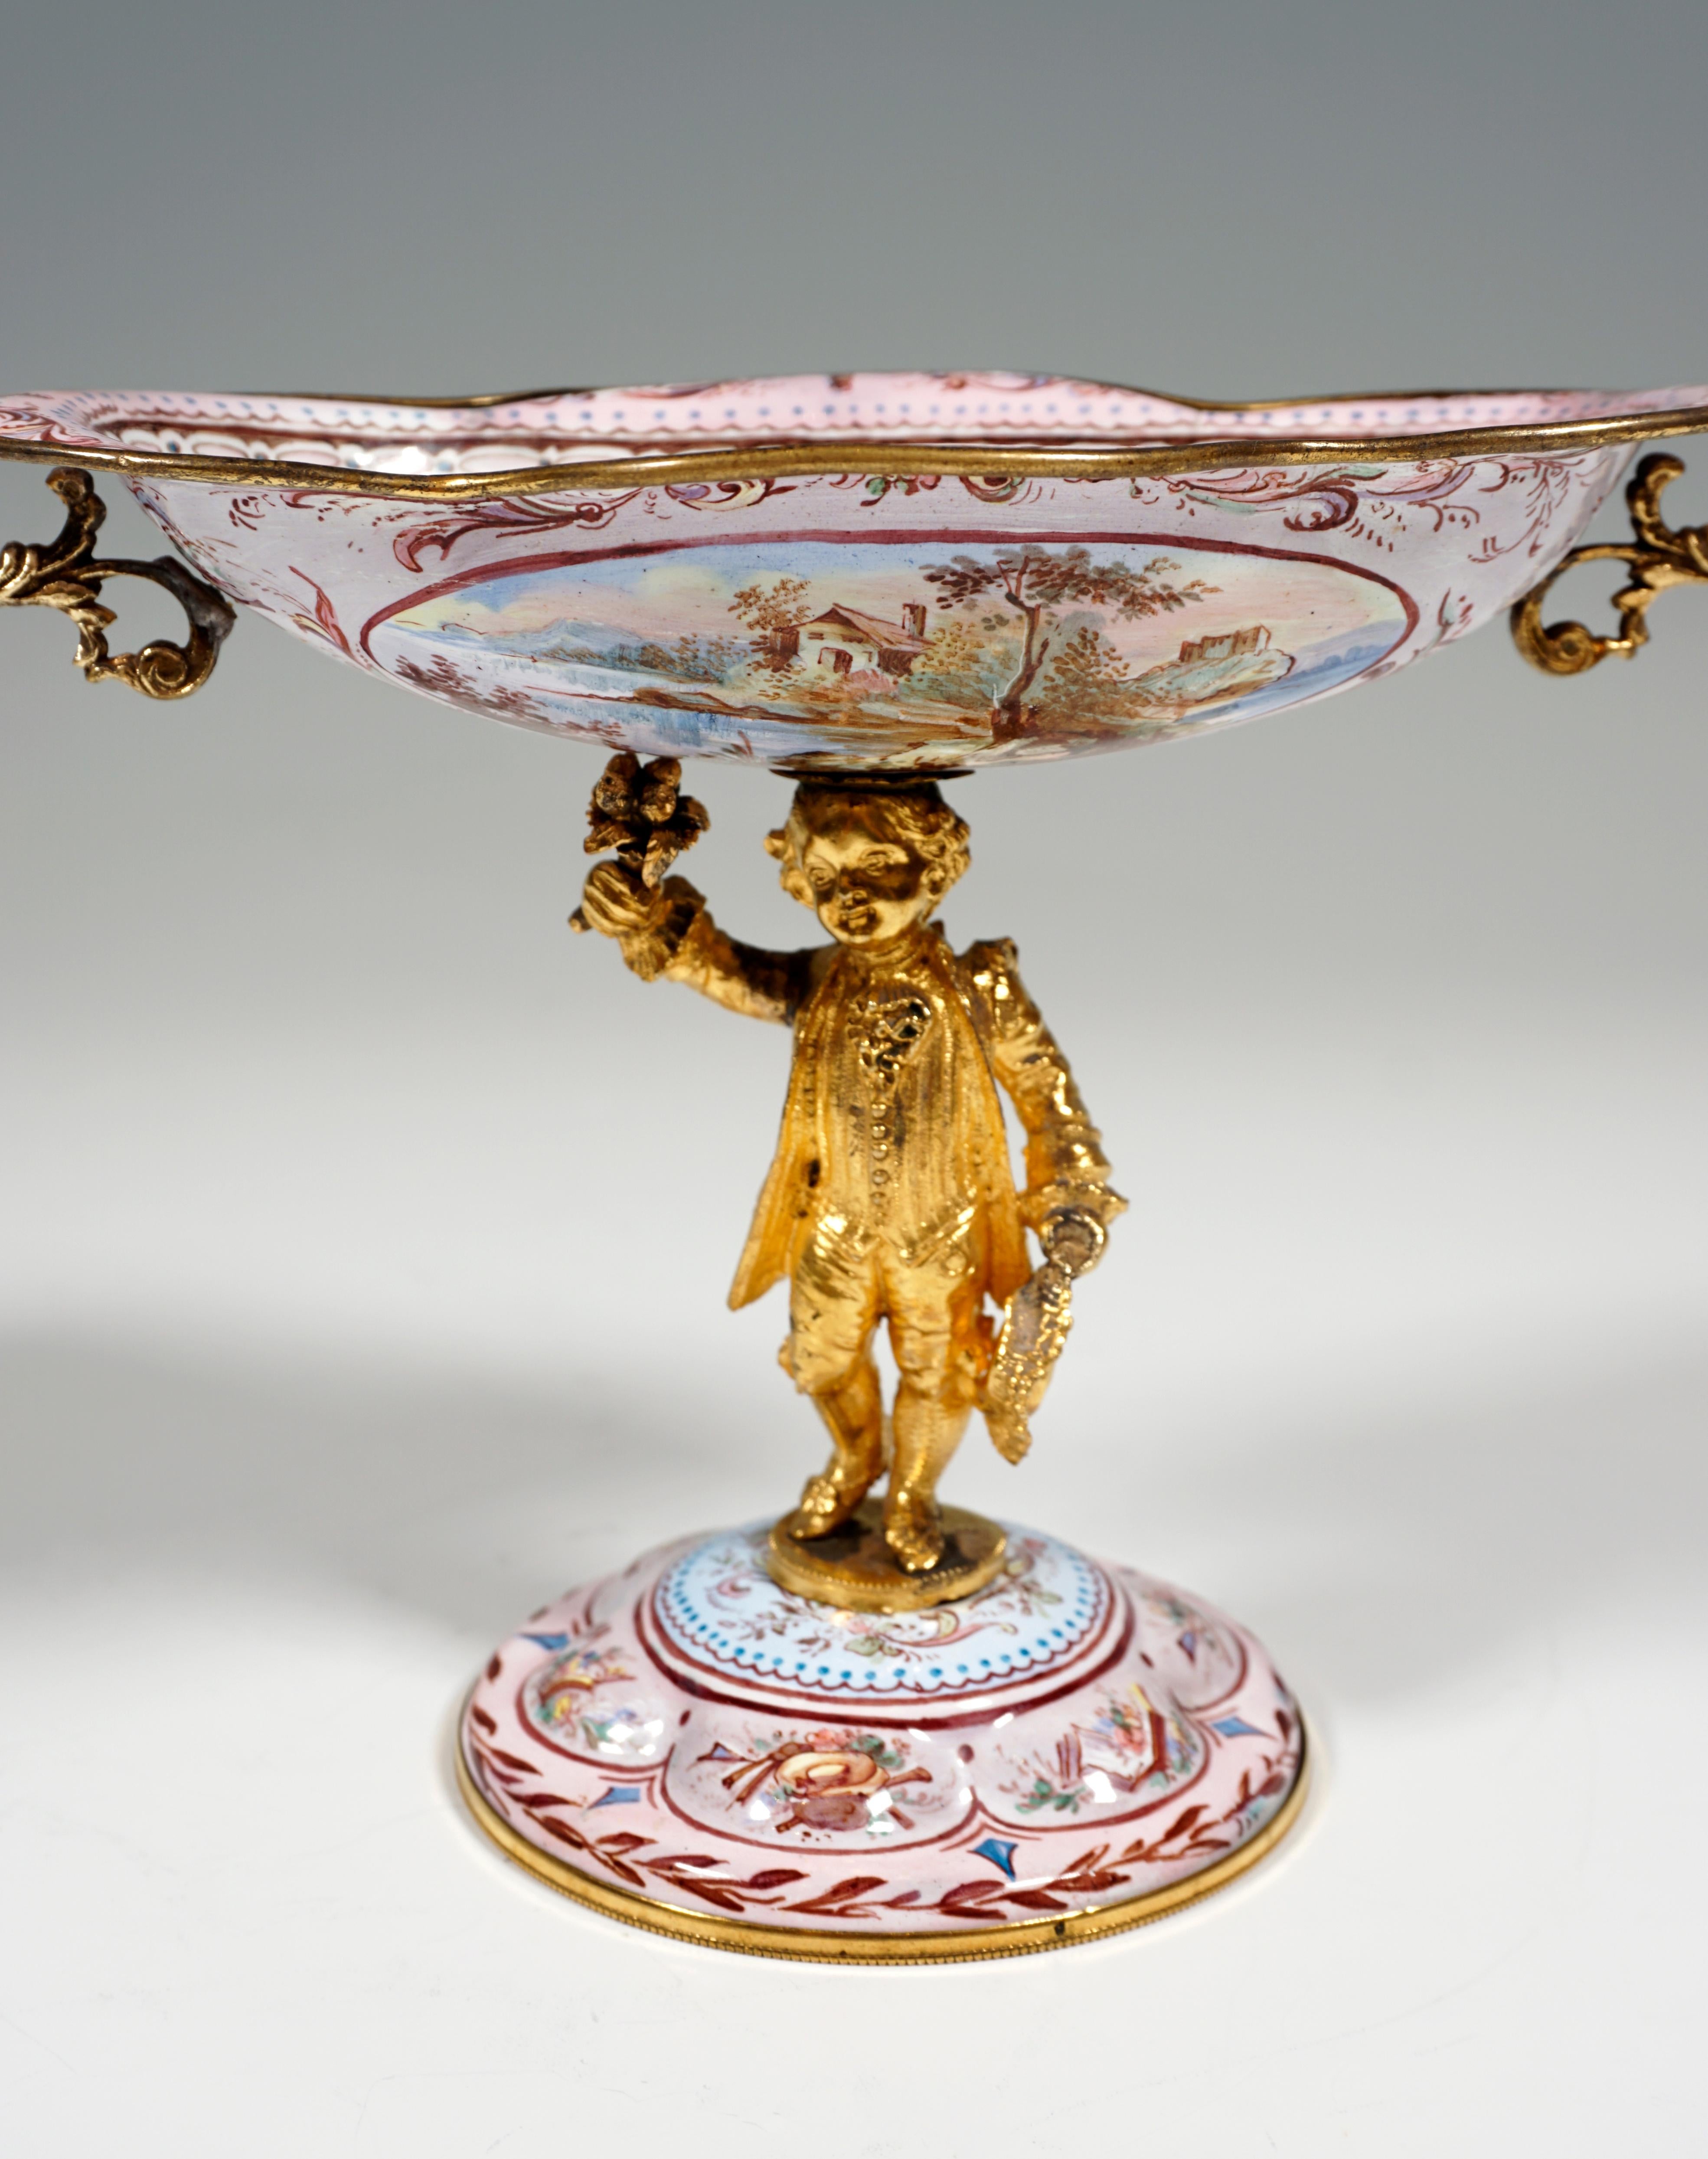 Brass 19th Century Viennese Enamel Centerpiece with Watteau and Arabesque Painting